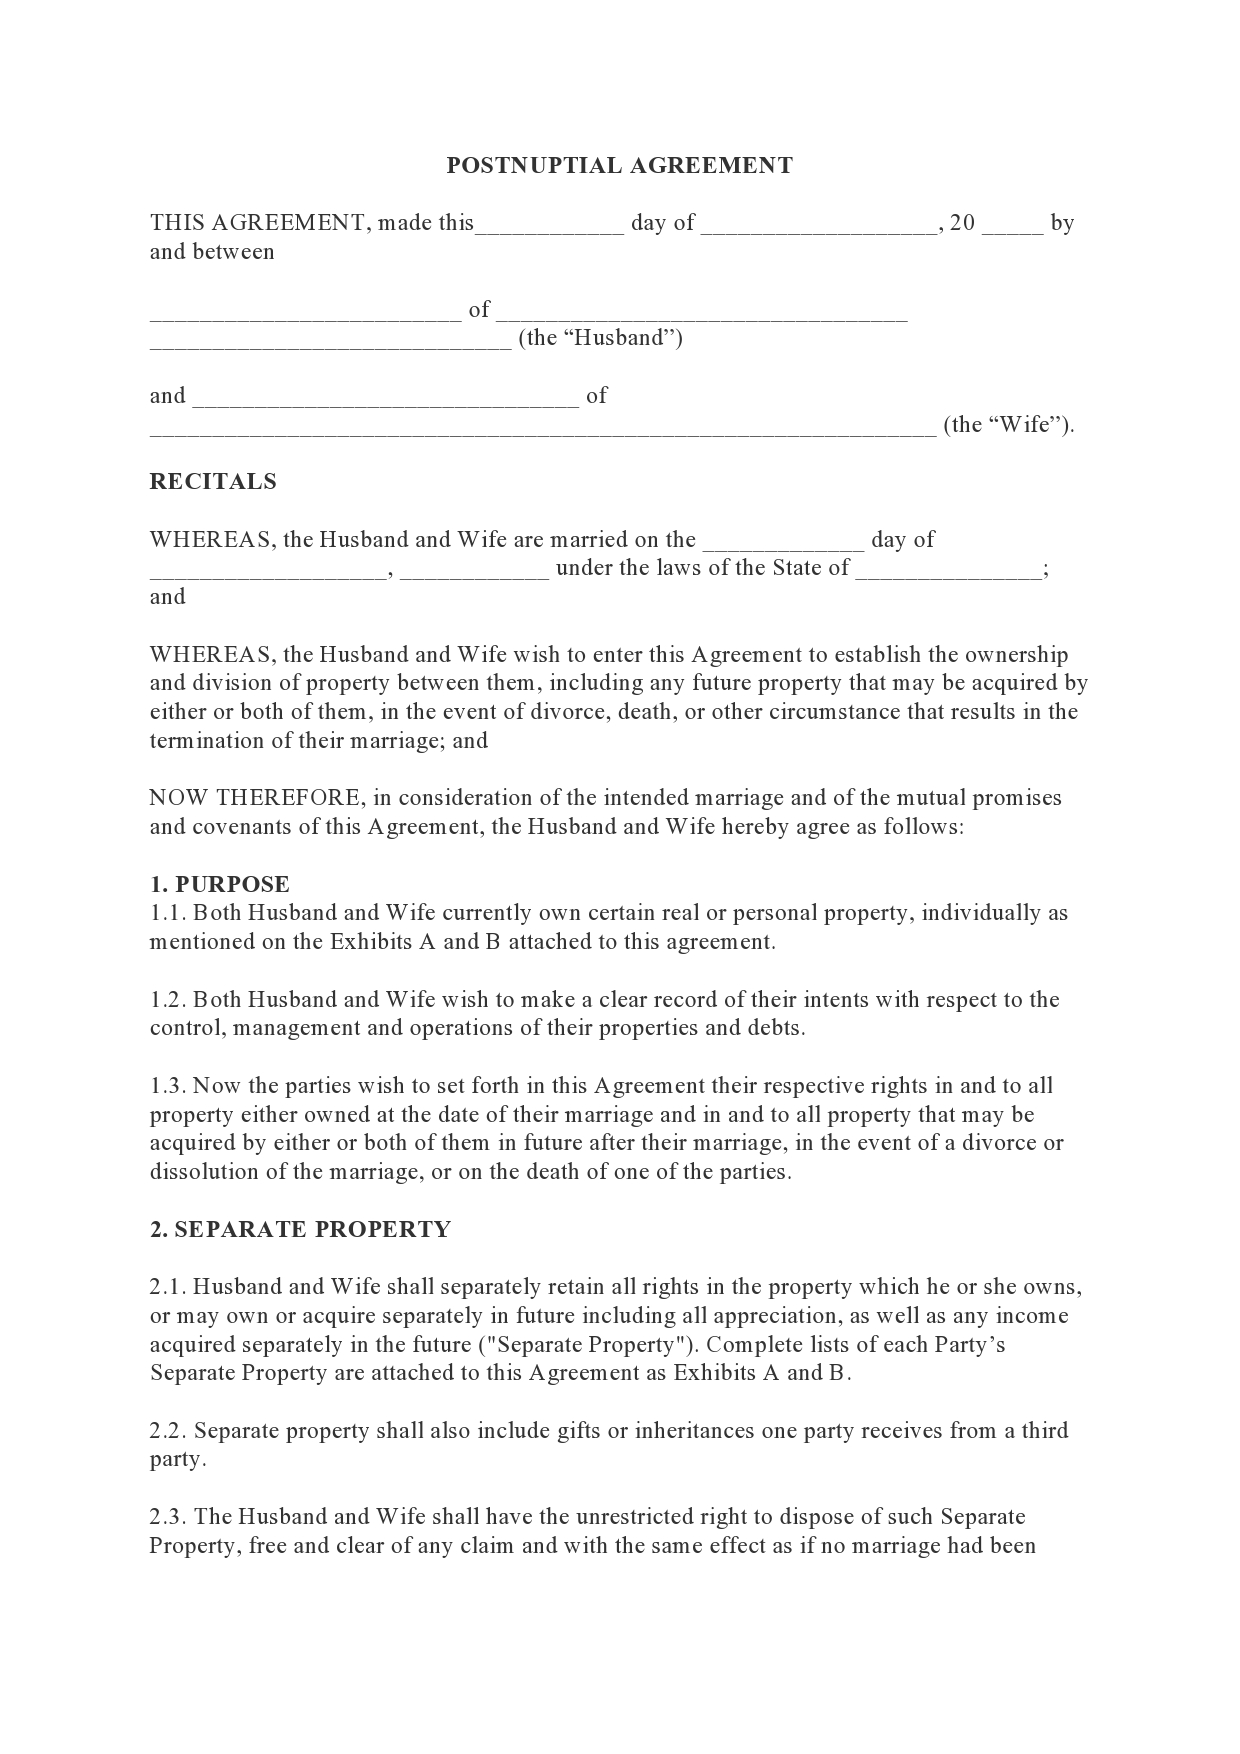 Free postnuptial agreement template 04